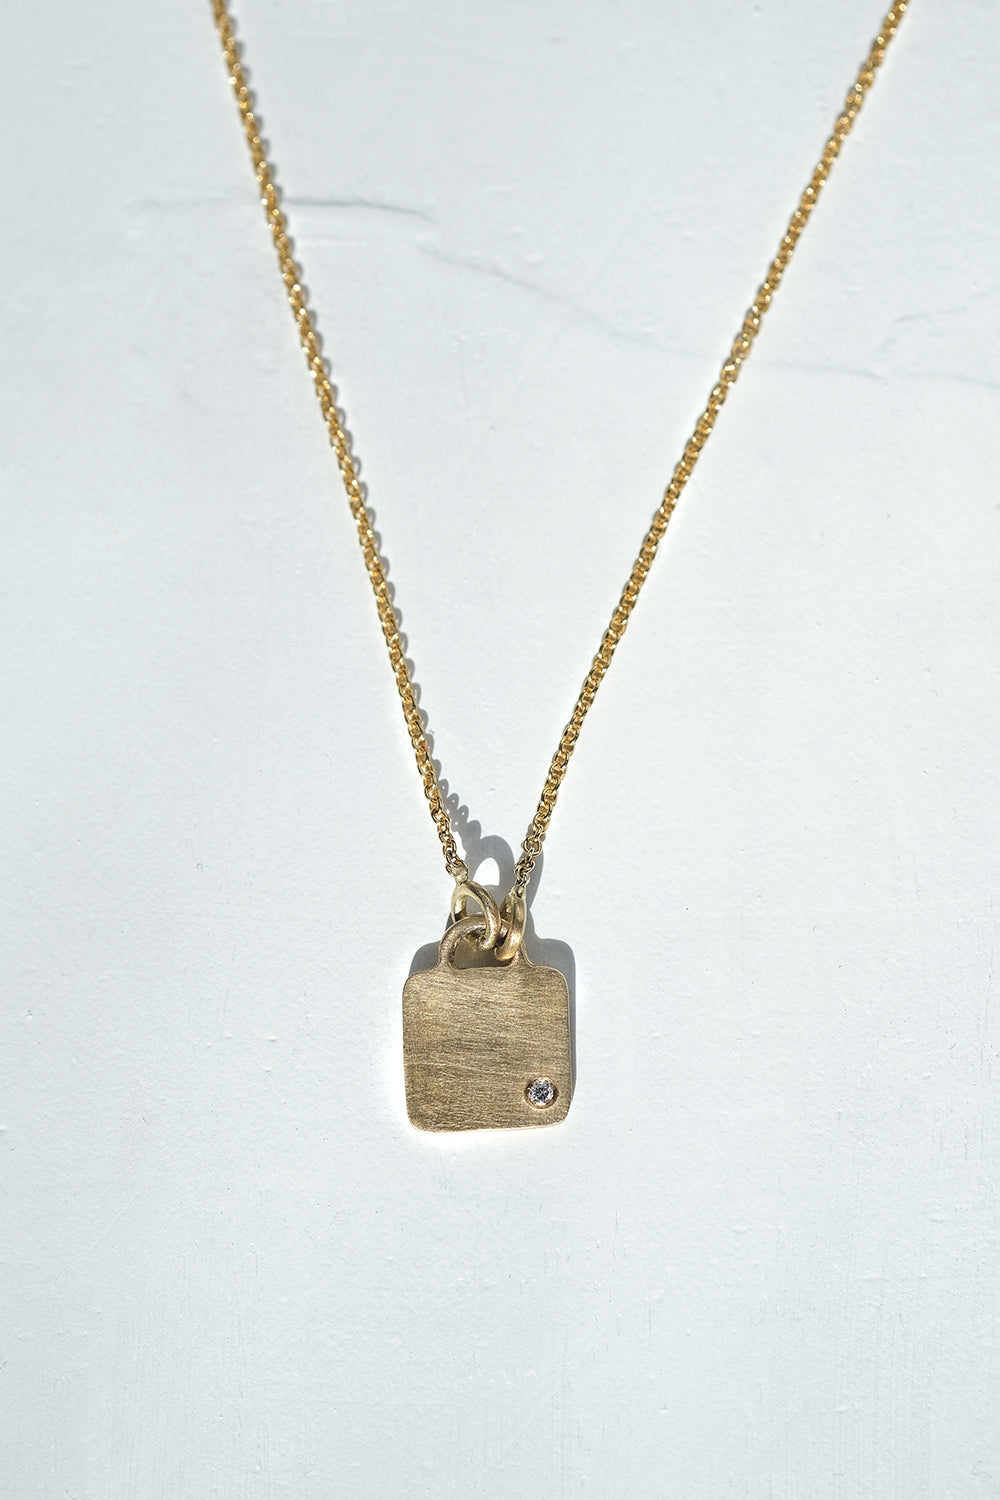 Gold Necklace With A Square Pendant Set With A Diamond